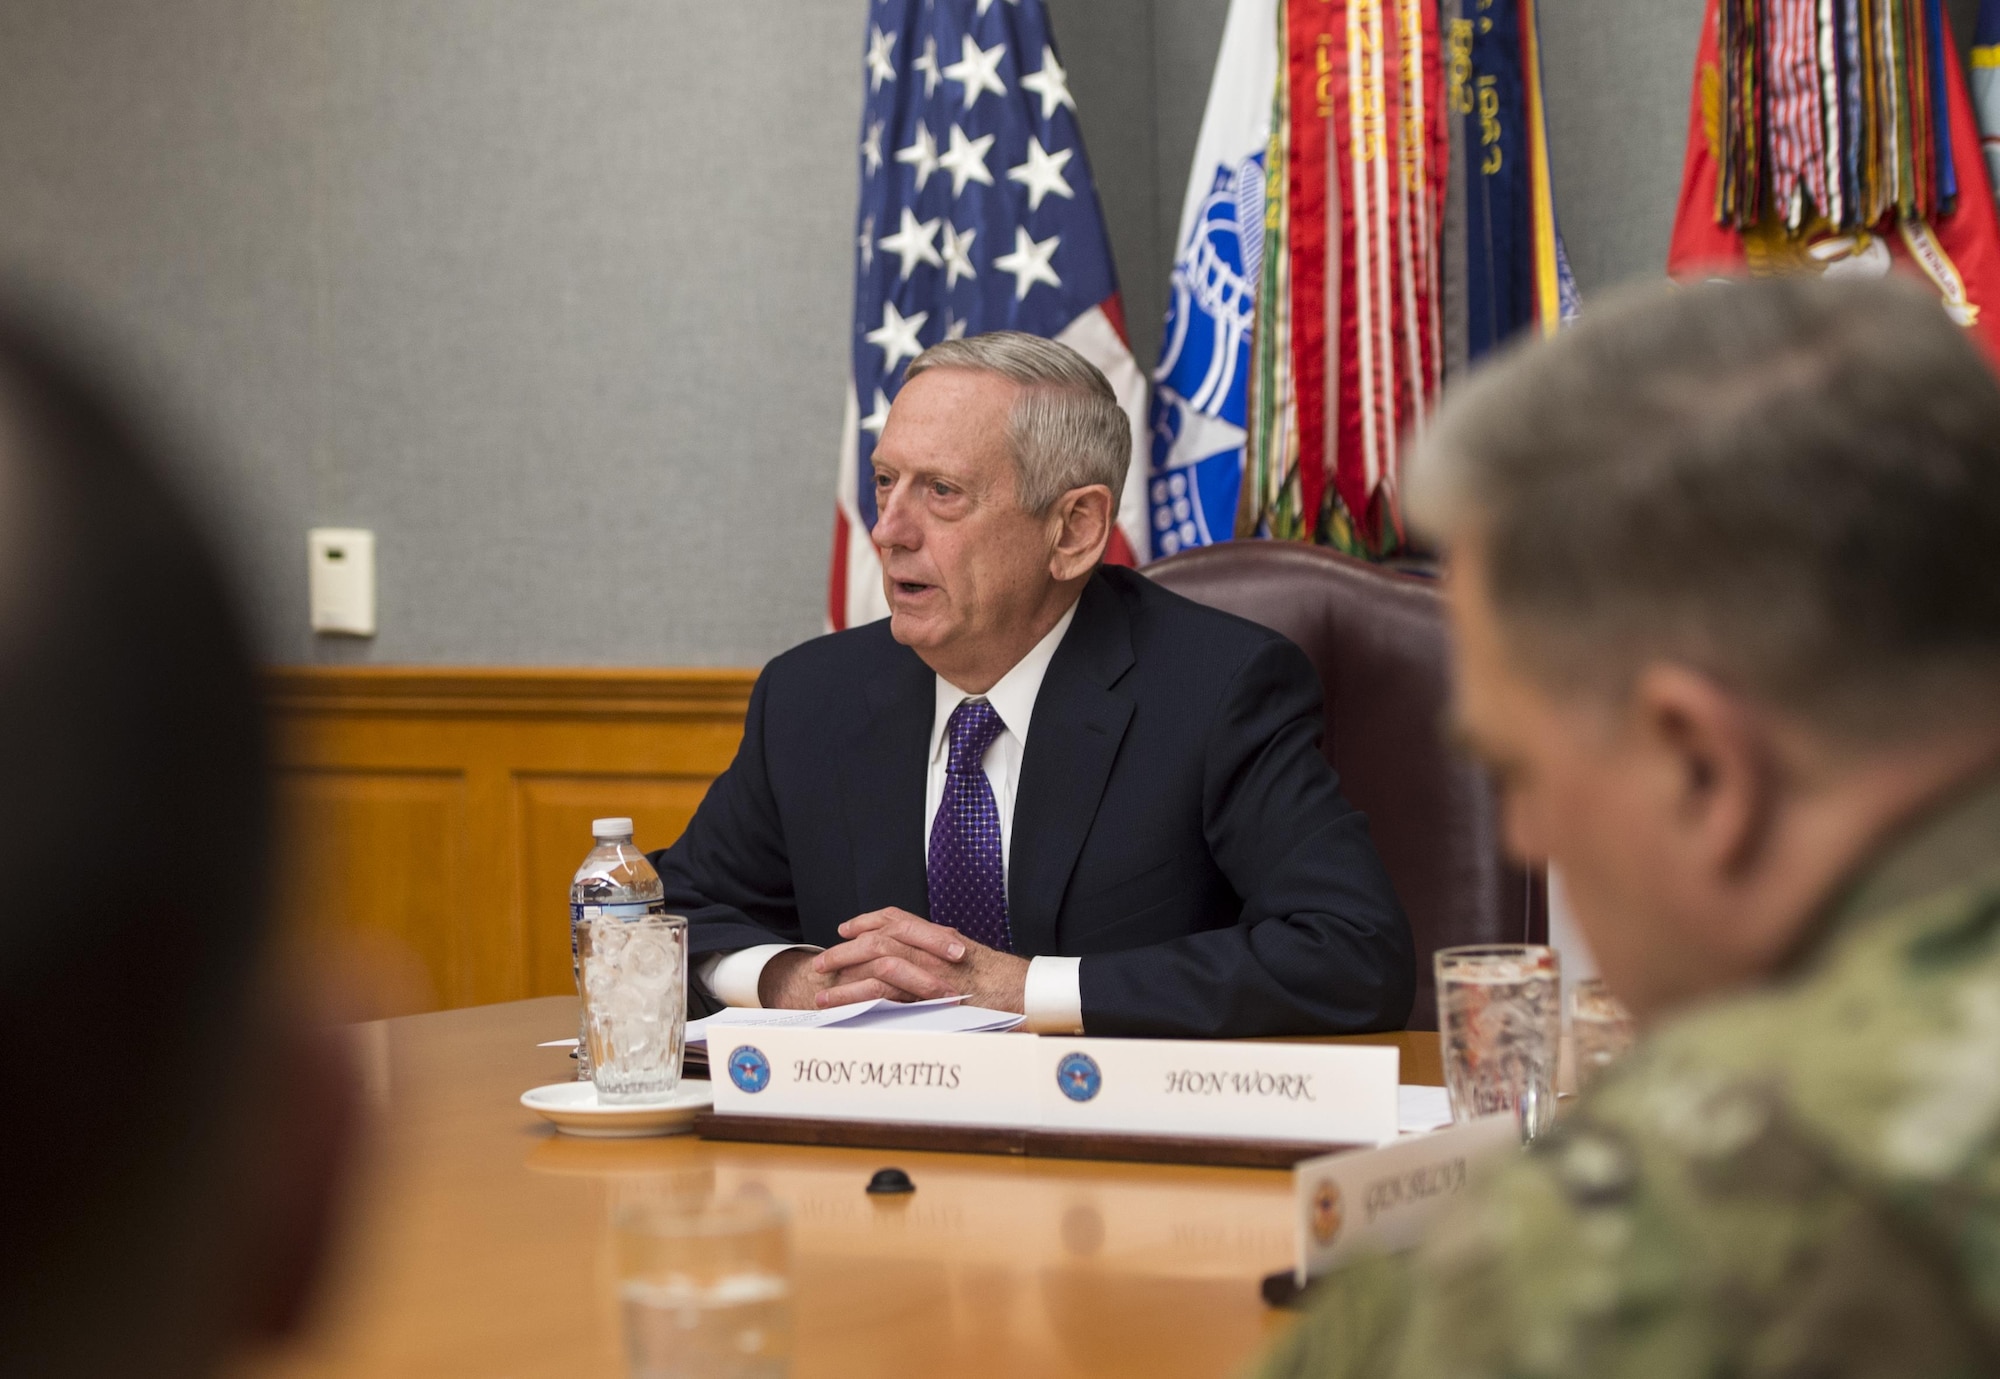 Secretary of Defense James Mattis meets with the Joint Chiefs of Staff at the Pentagon in Washington, D.C., Jan. 23, 2017. (DOD photo by Air Force Tech. Sgt. Brigitte N. Brantley)